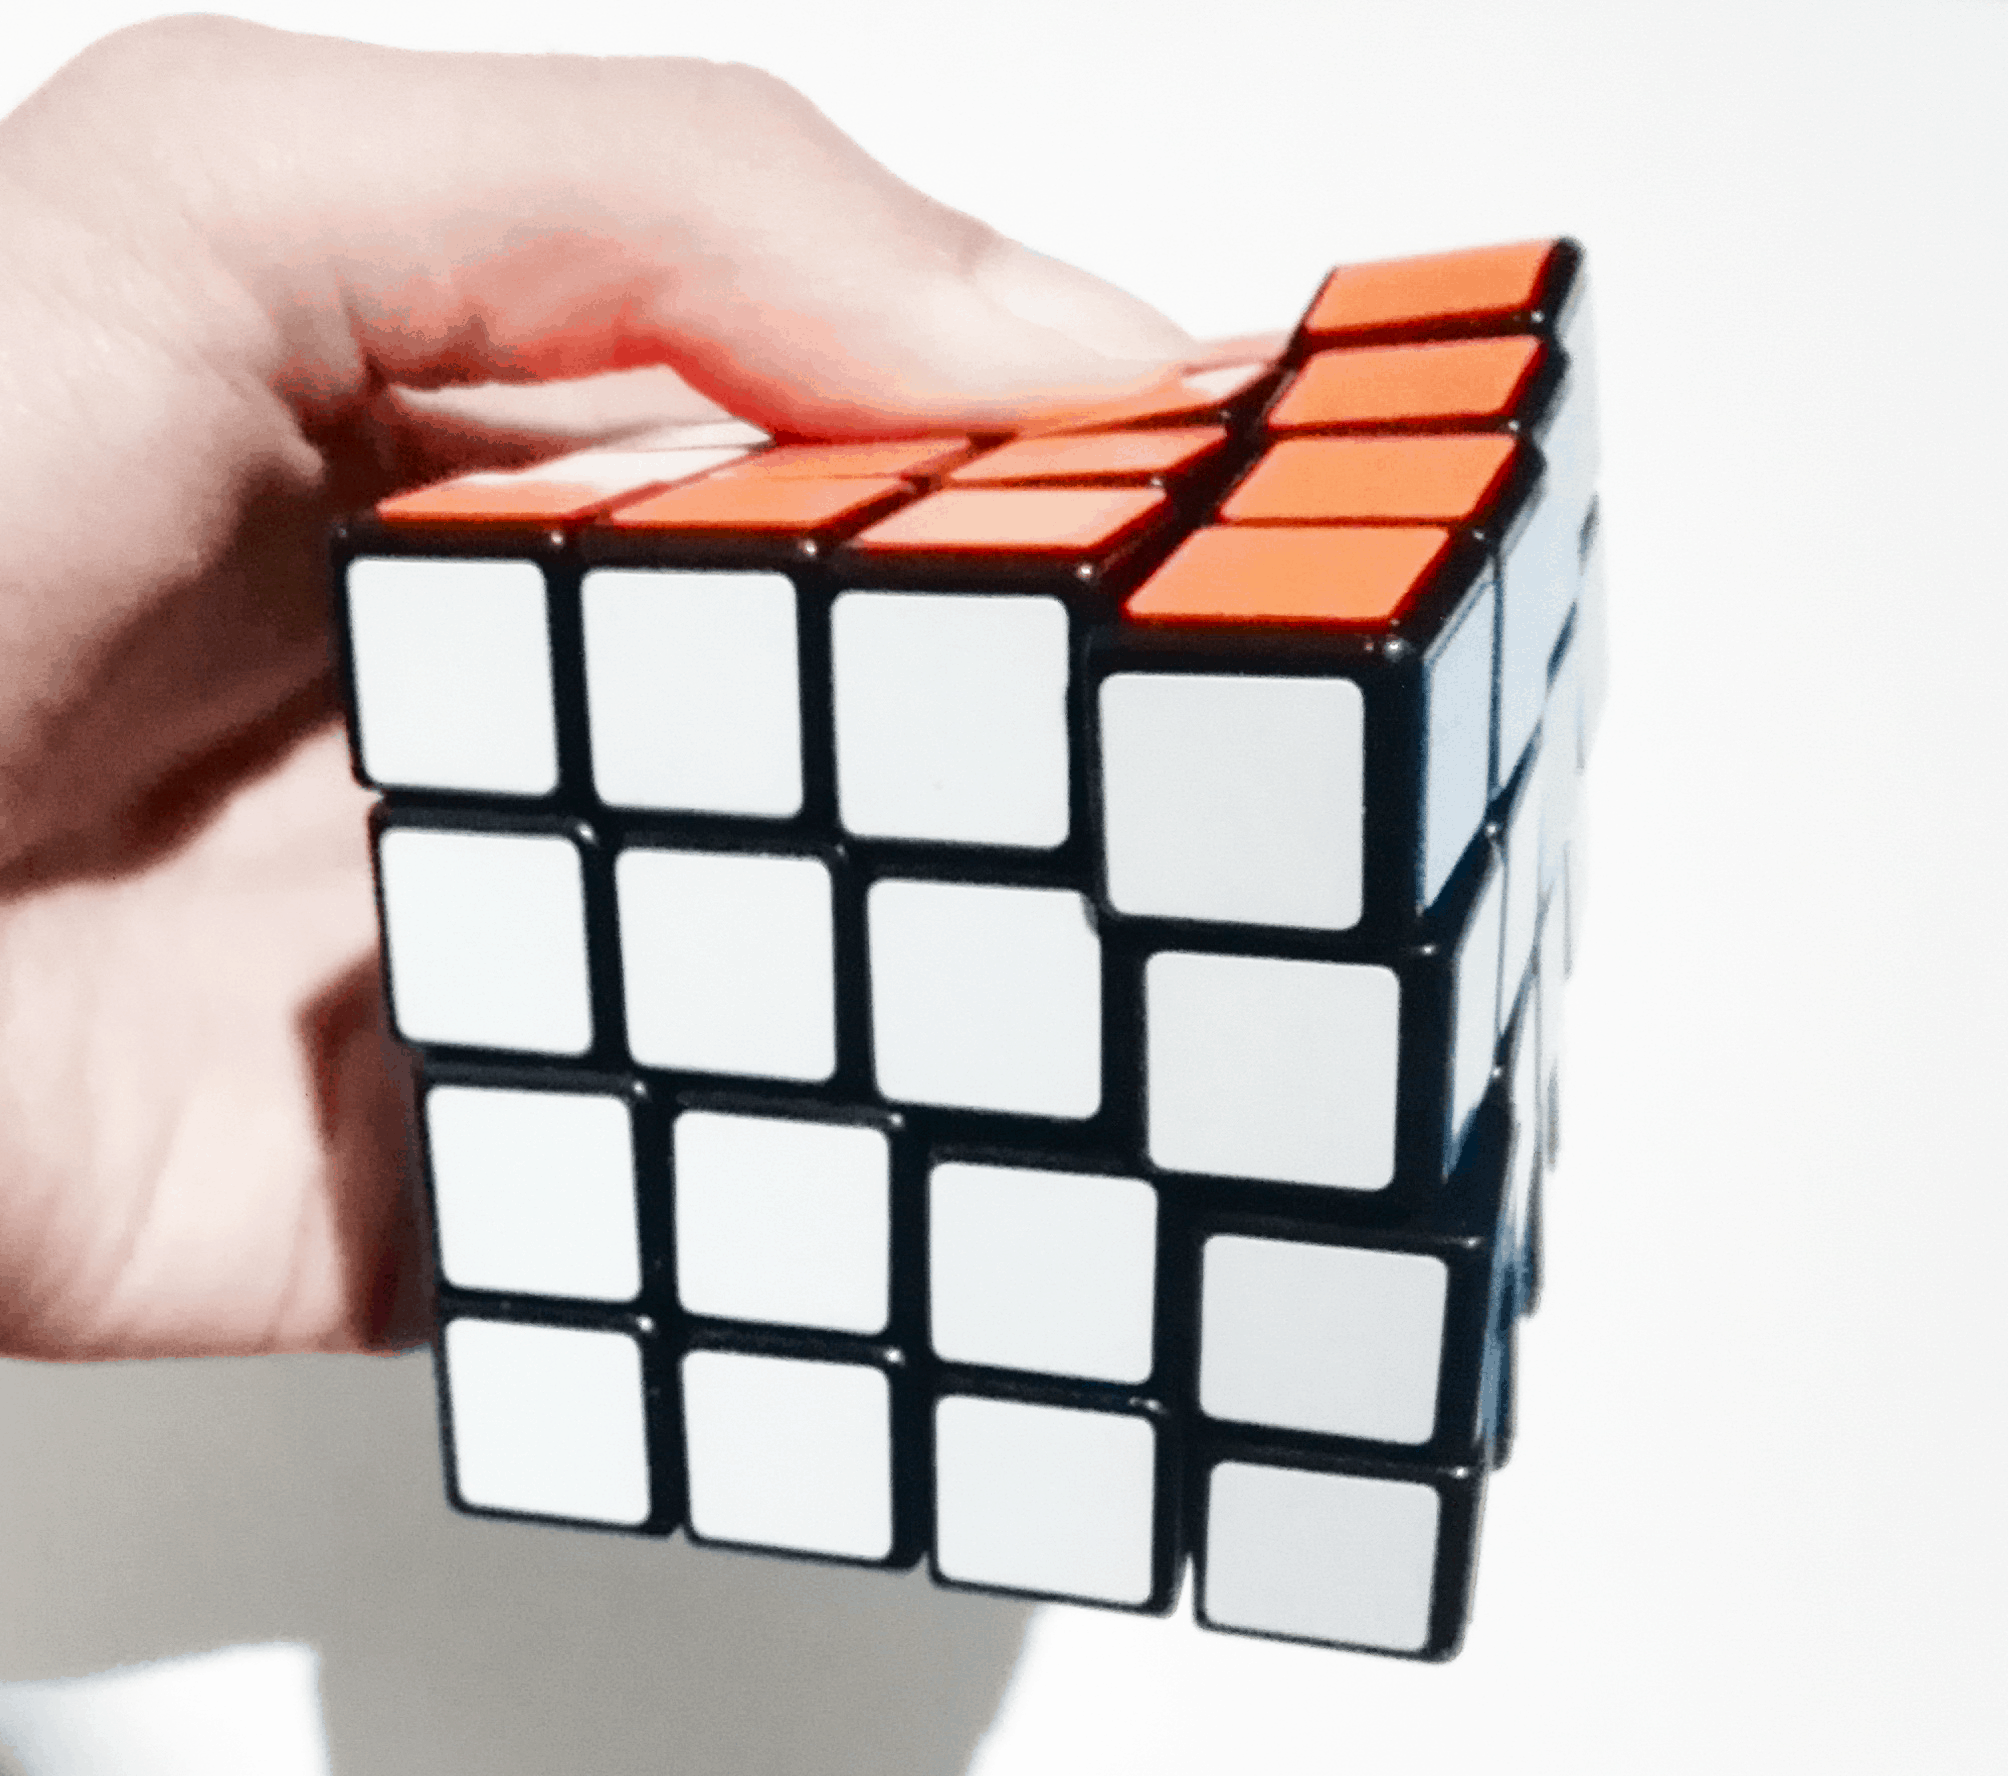 Top 5 Best 4x4 Speed Cubes Reviews [2023 Buying Guide]